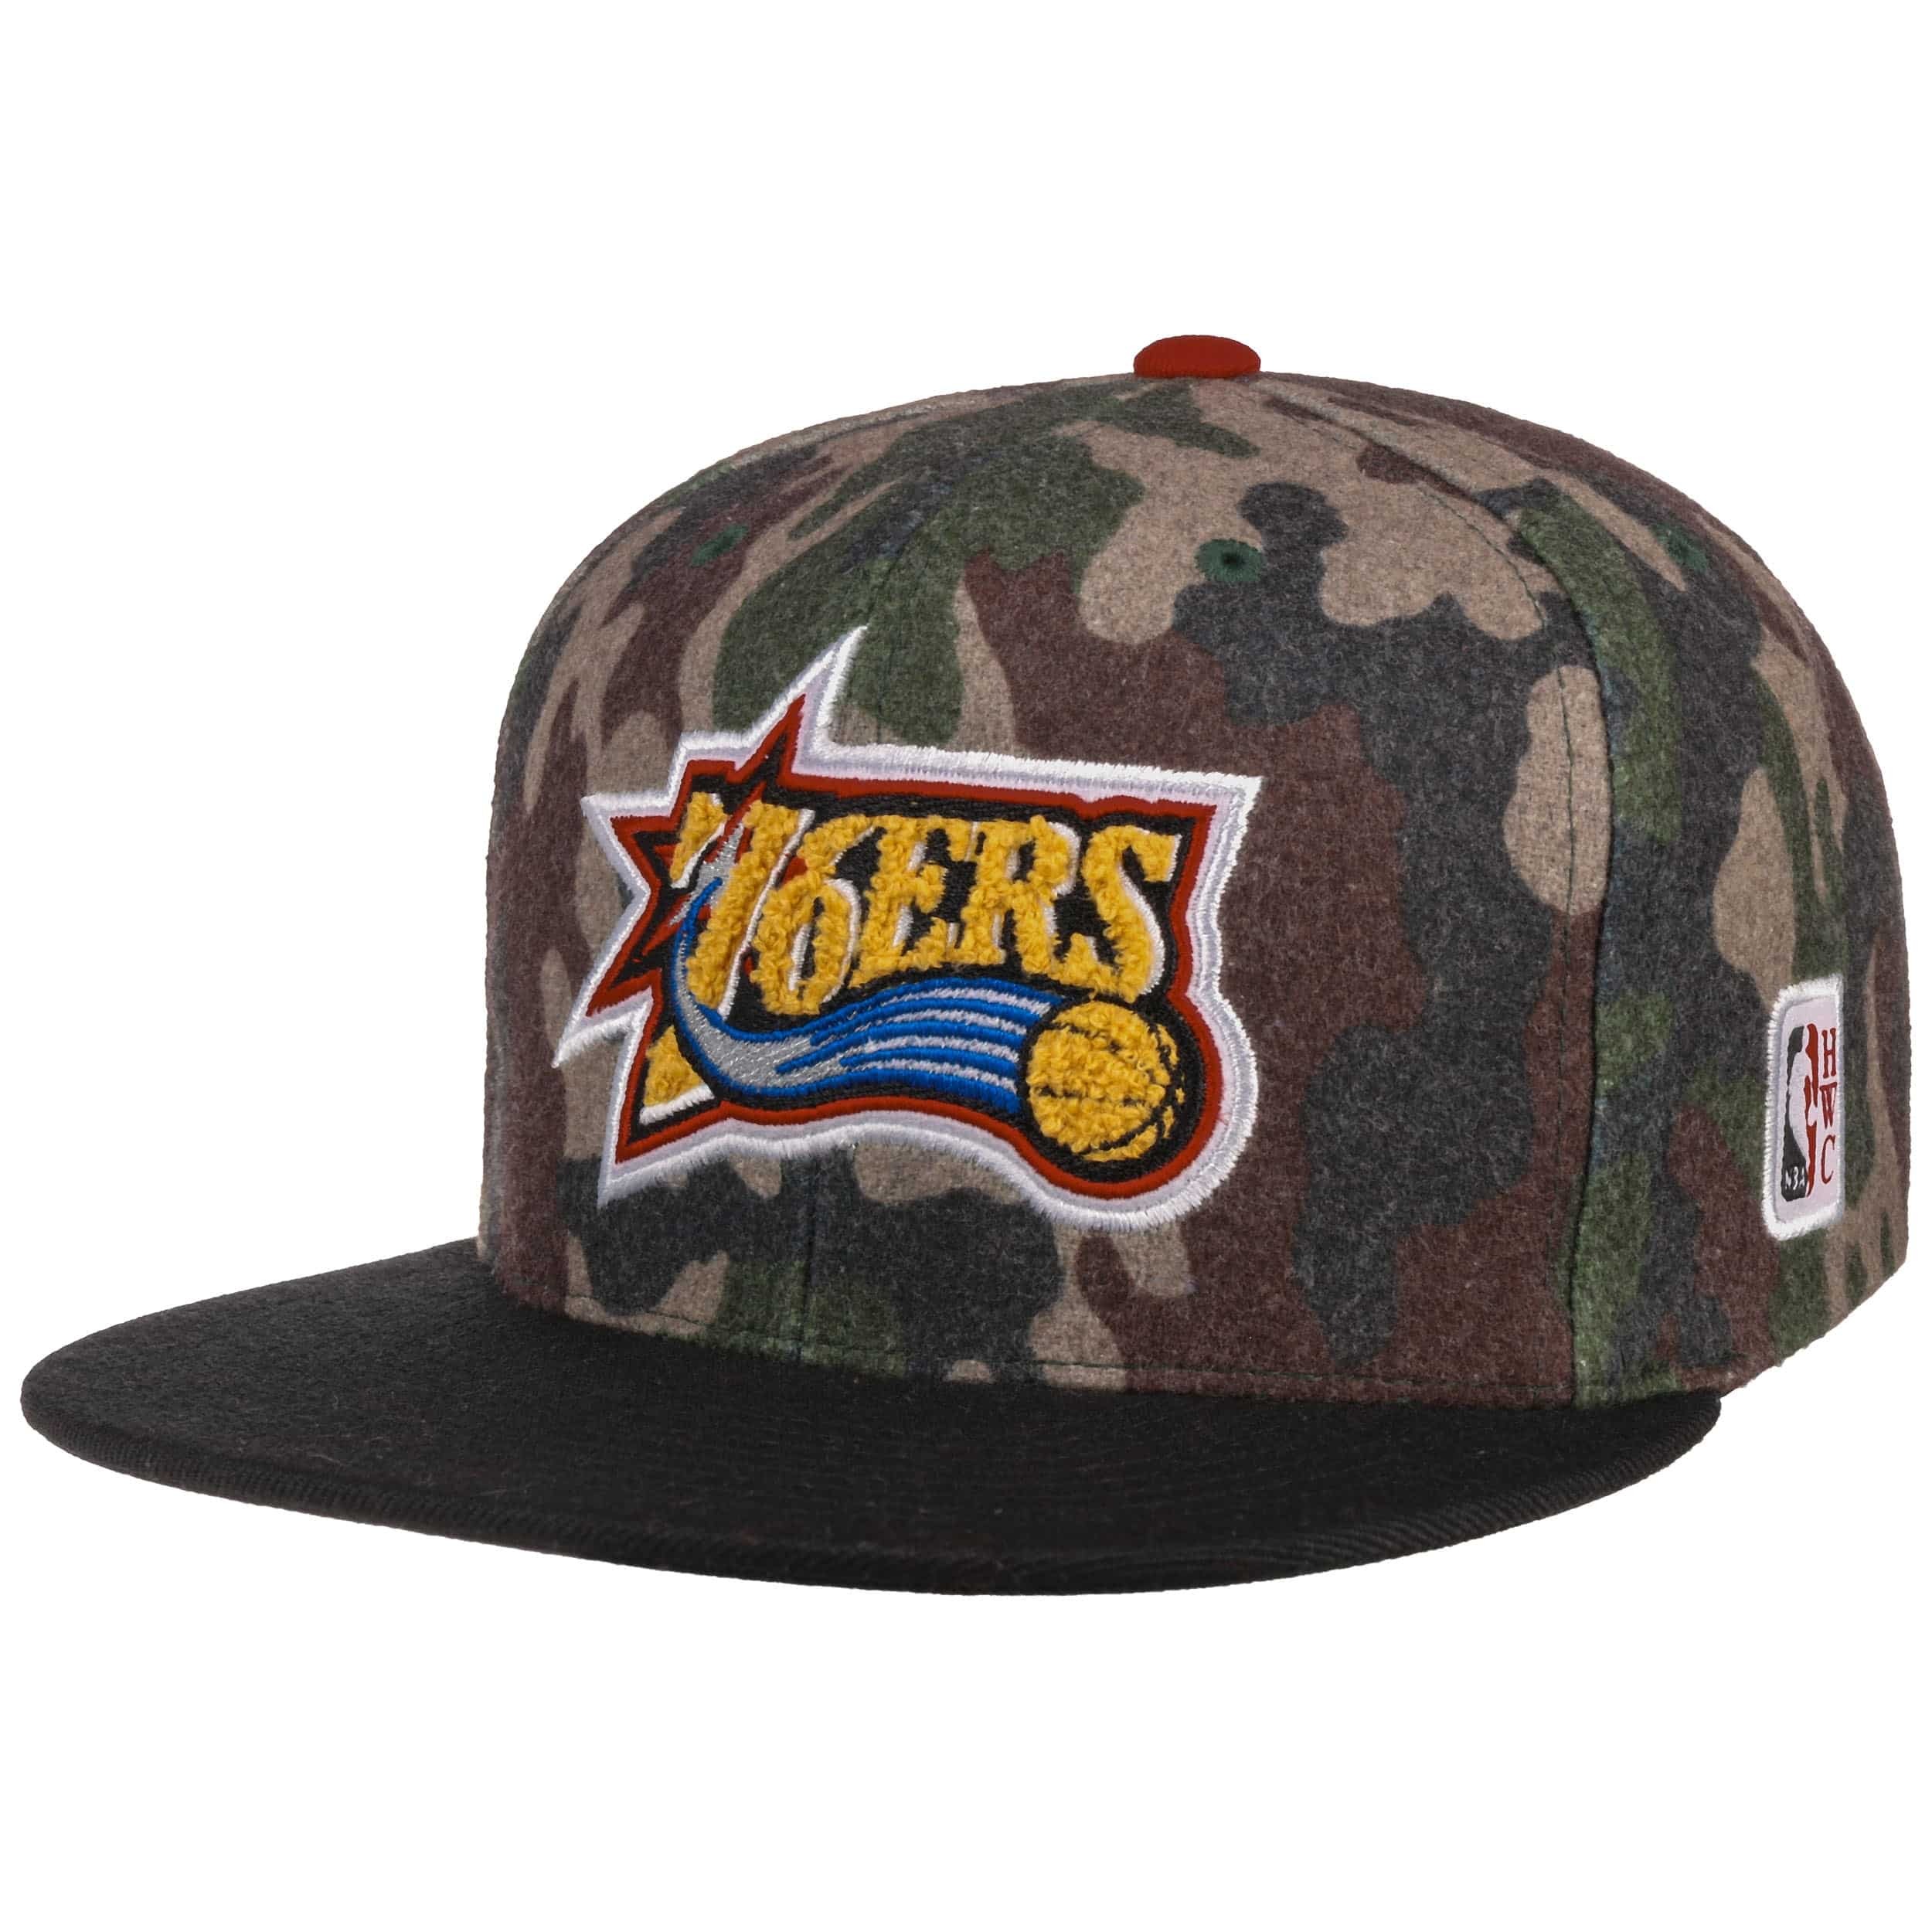 HWC Camo Flannel Lakers Cap by Mitchell & Ness